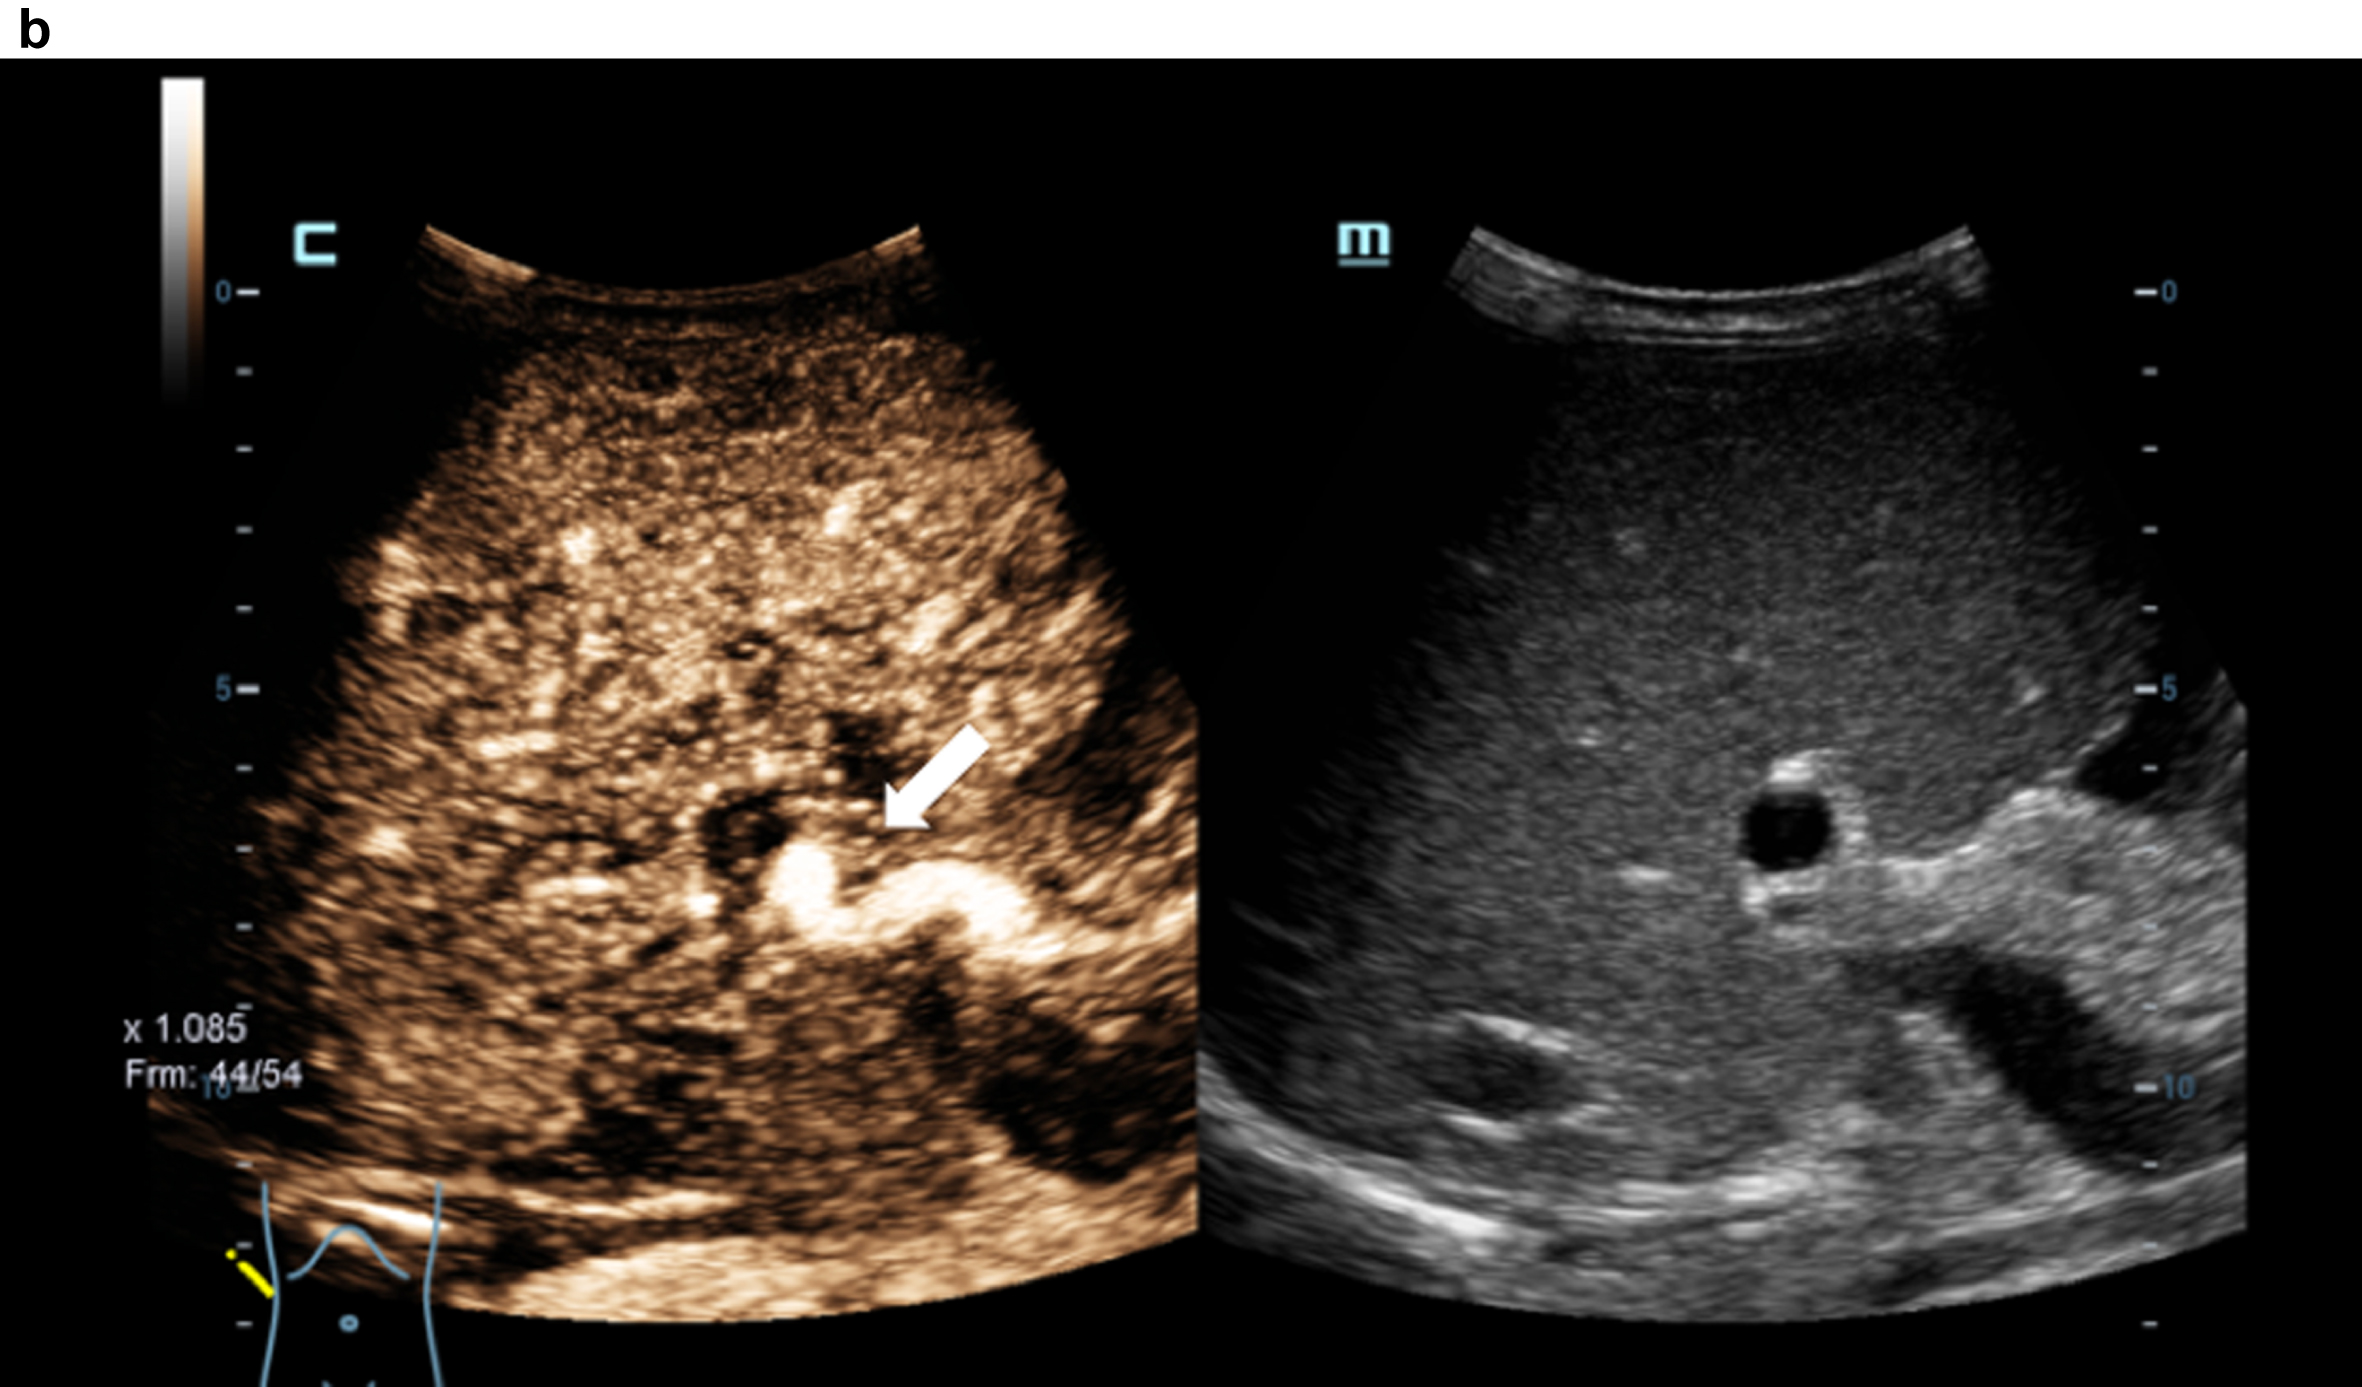 Contrast medium sonography (CEUS) with detection of the irregular early liver contrast and the elongated hepatic artery (arrow). Inhomogeneous liver in the grey image.